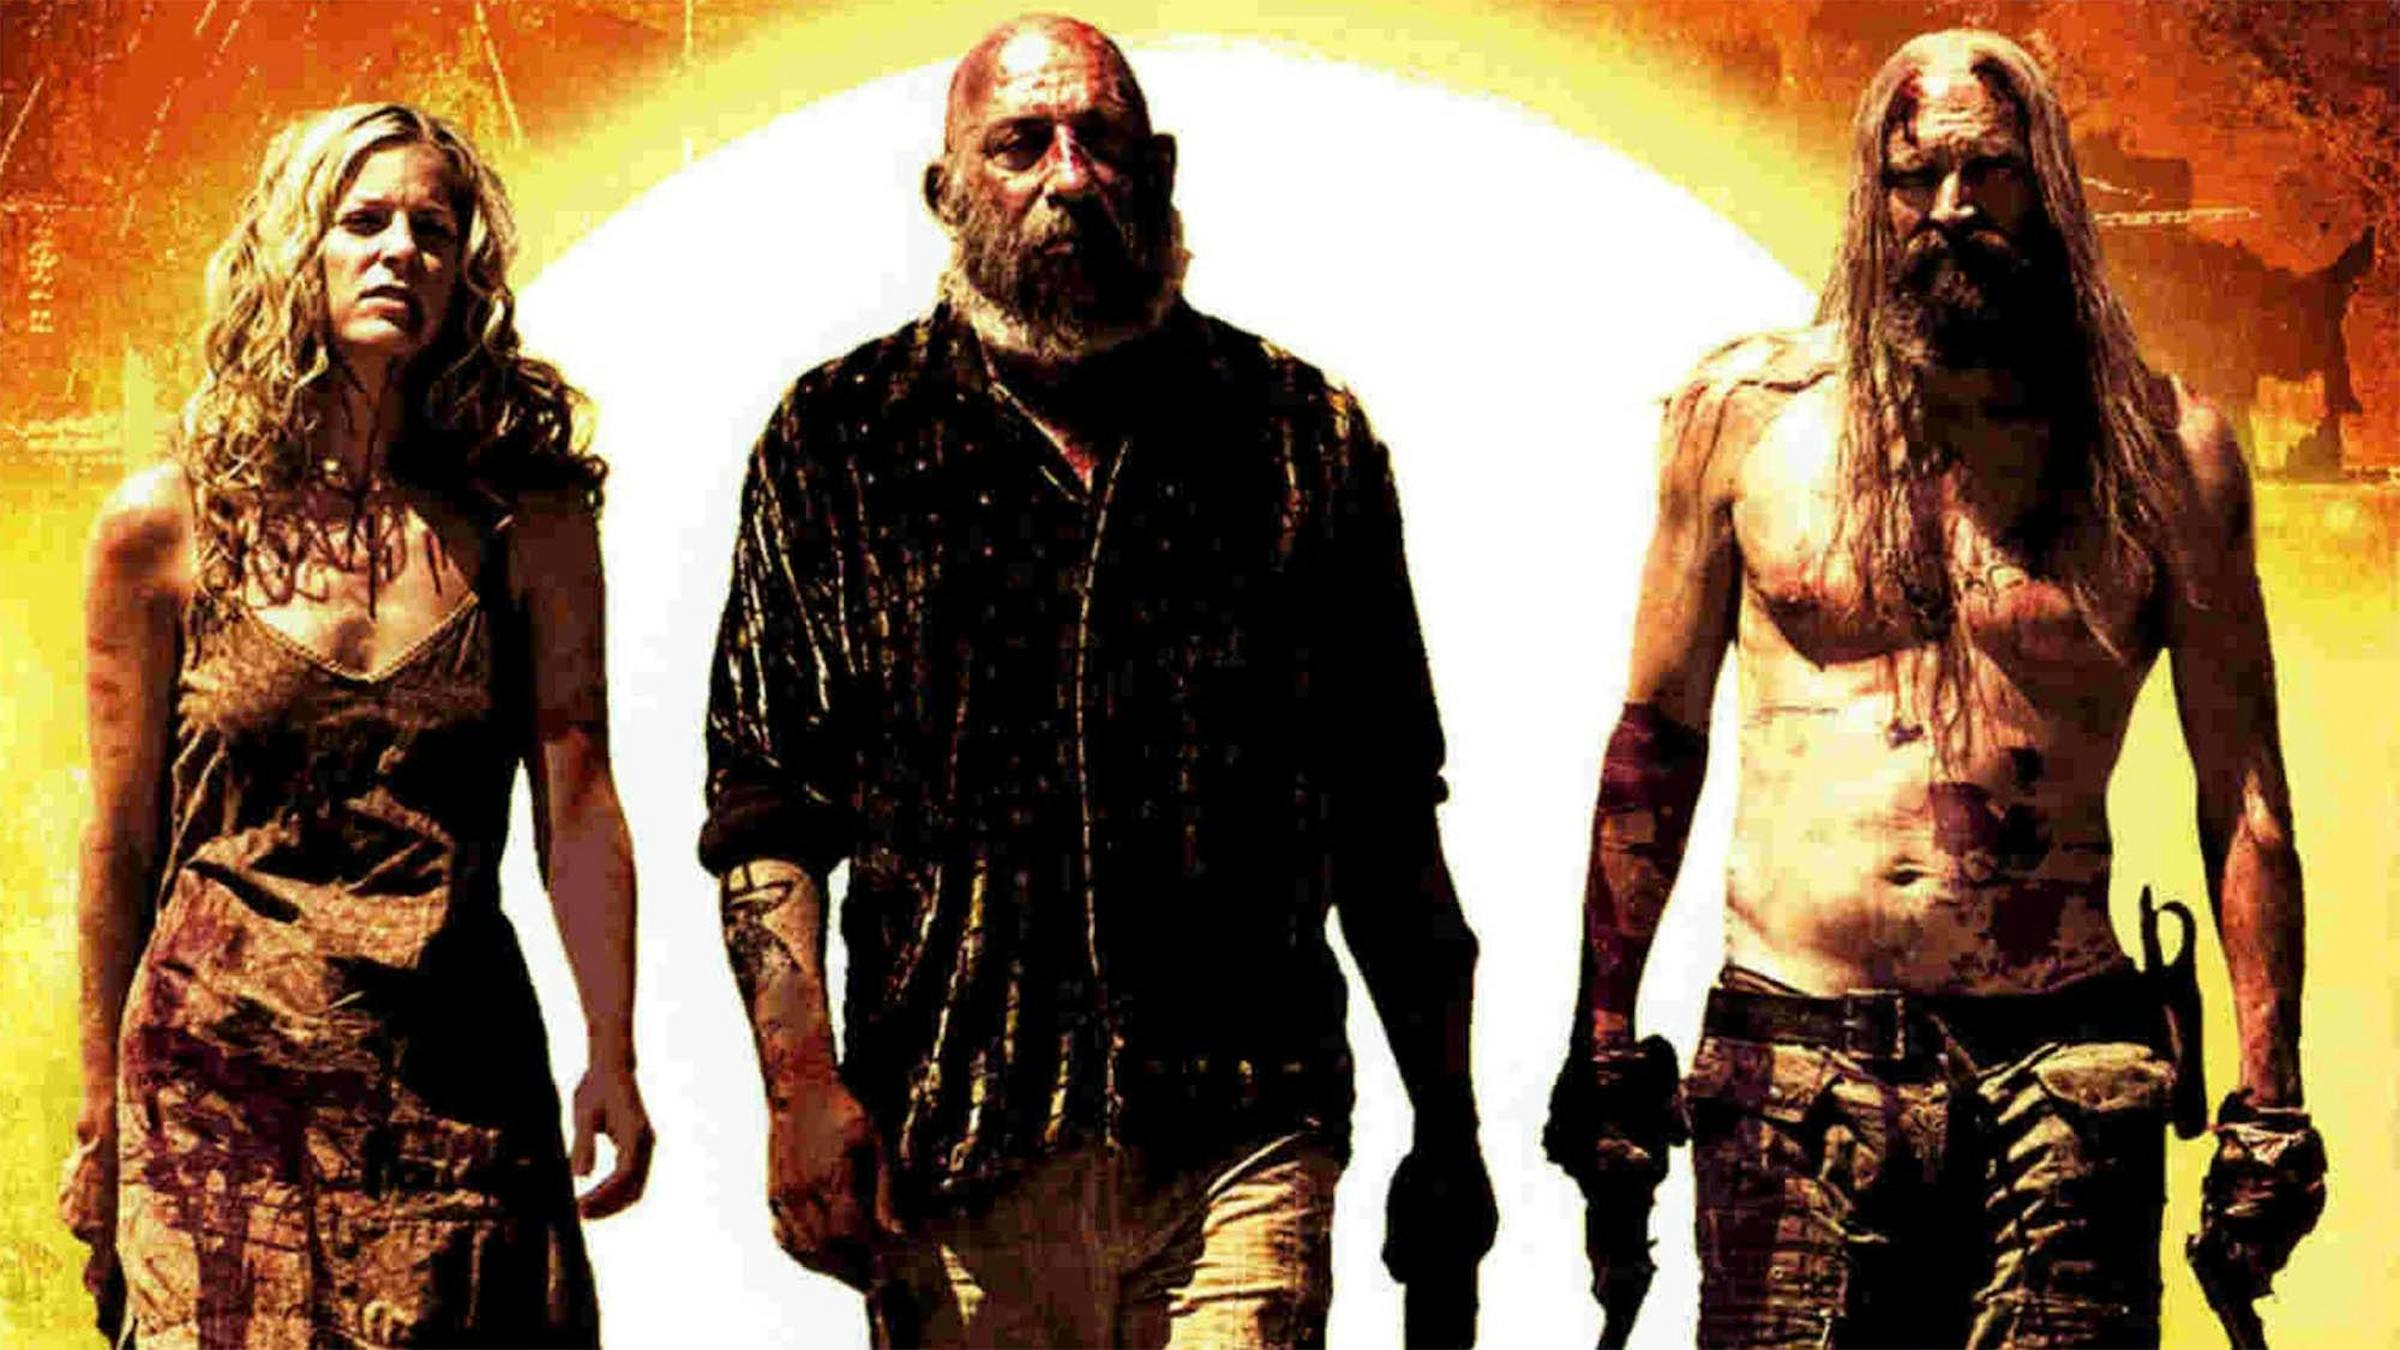 Rob Zombie’s 3 From Hell Given R Rating For “Strong Sadistic Violence” and “Graphic Nudity”